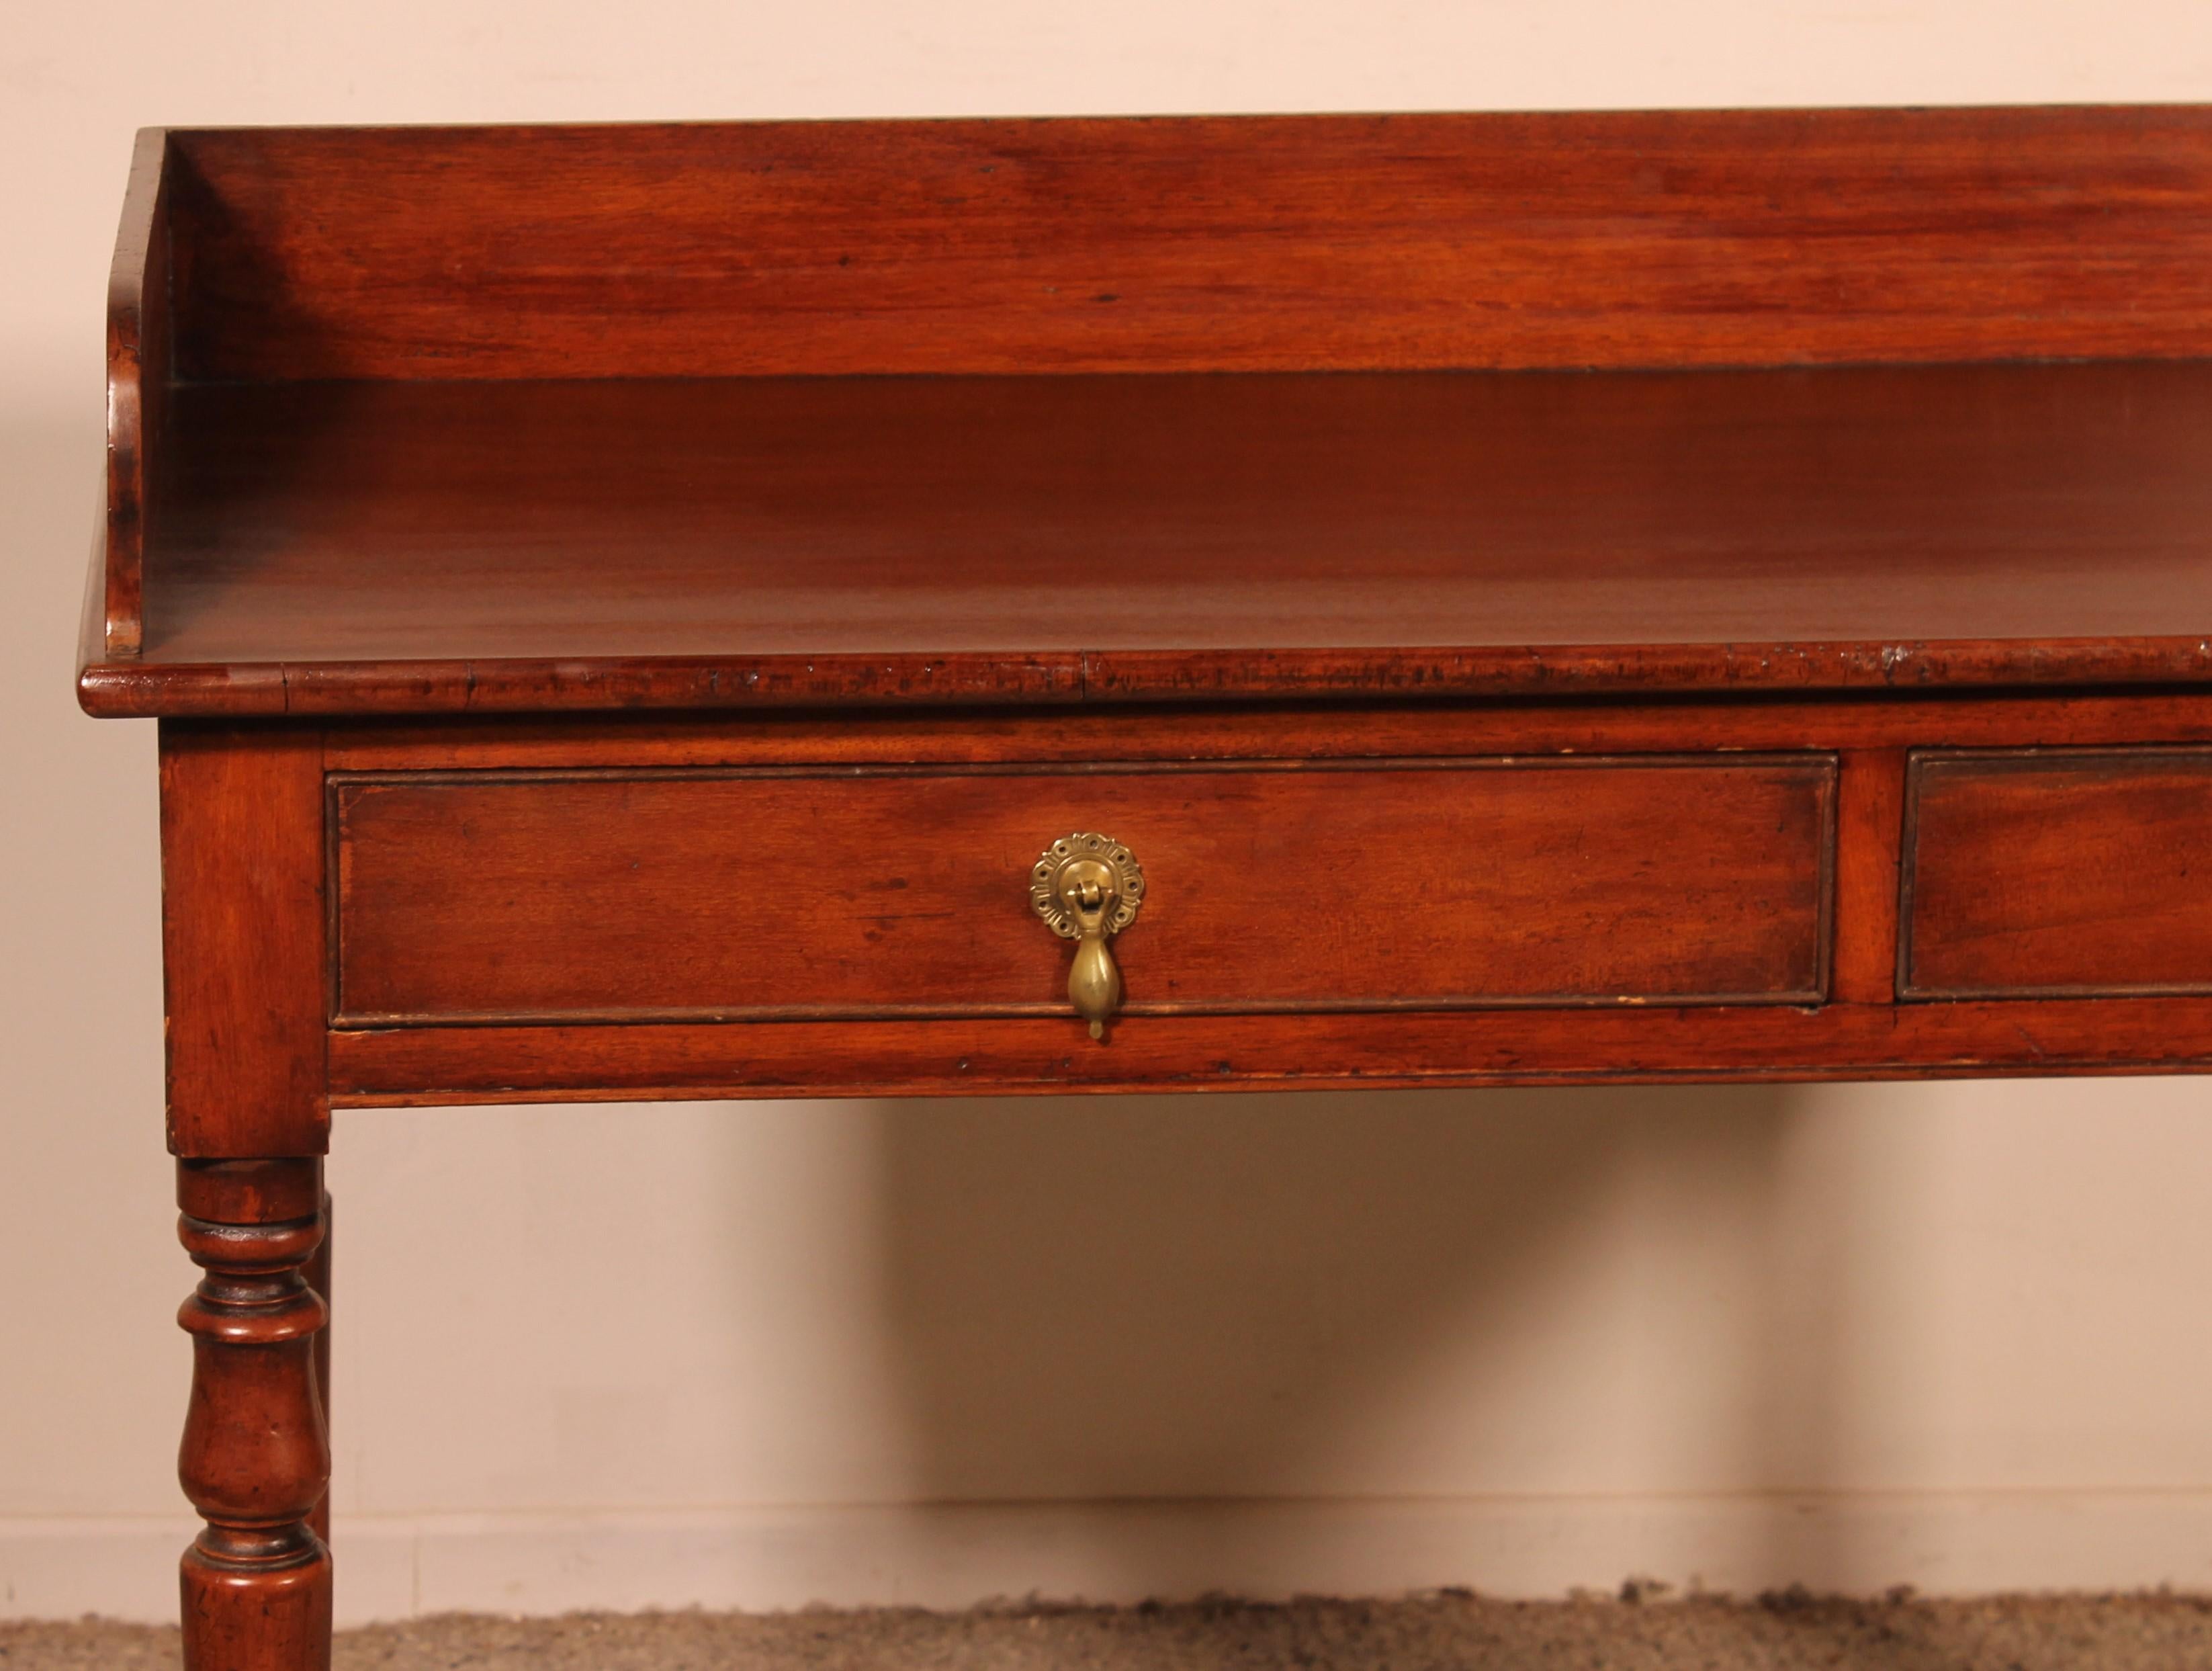 a fine mahogany writing table with two drawers from the 19th century from England

Elegant desk which has two drawers in the belt which is entirely in solid mahogany
The desk rests on a turned base
 The desk is in perfect condition and has a very